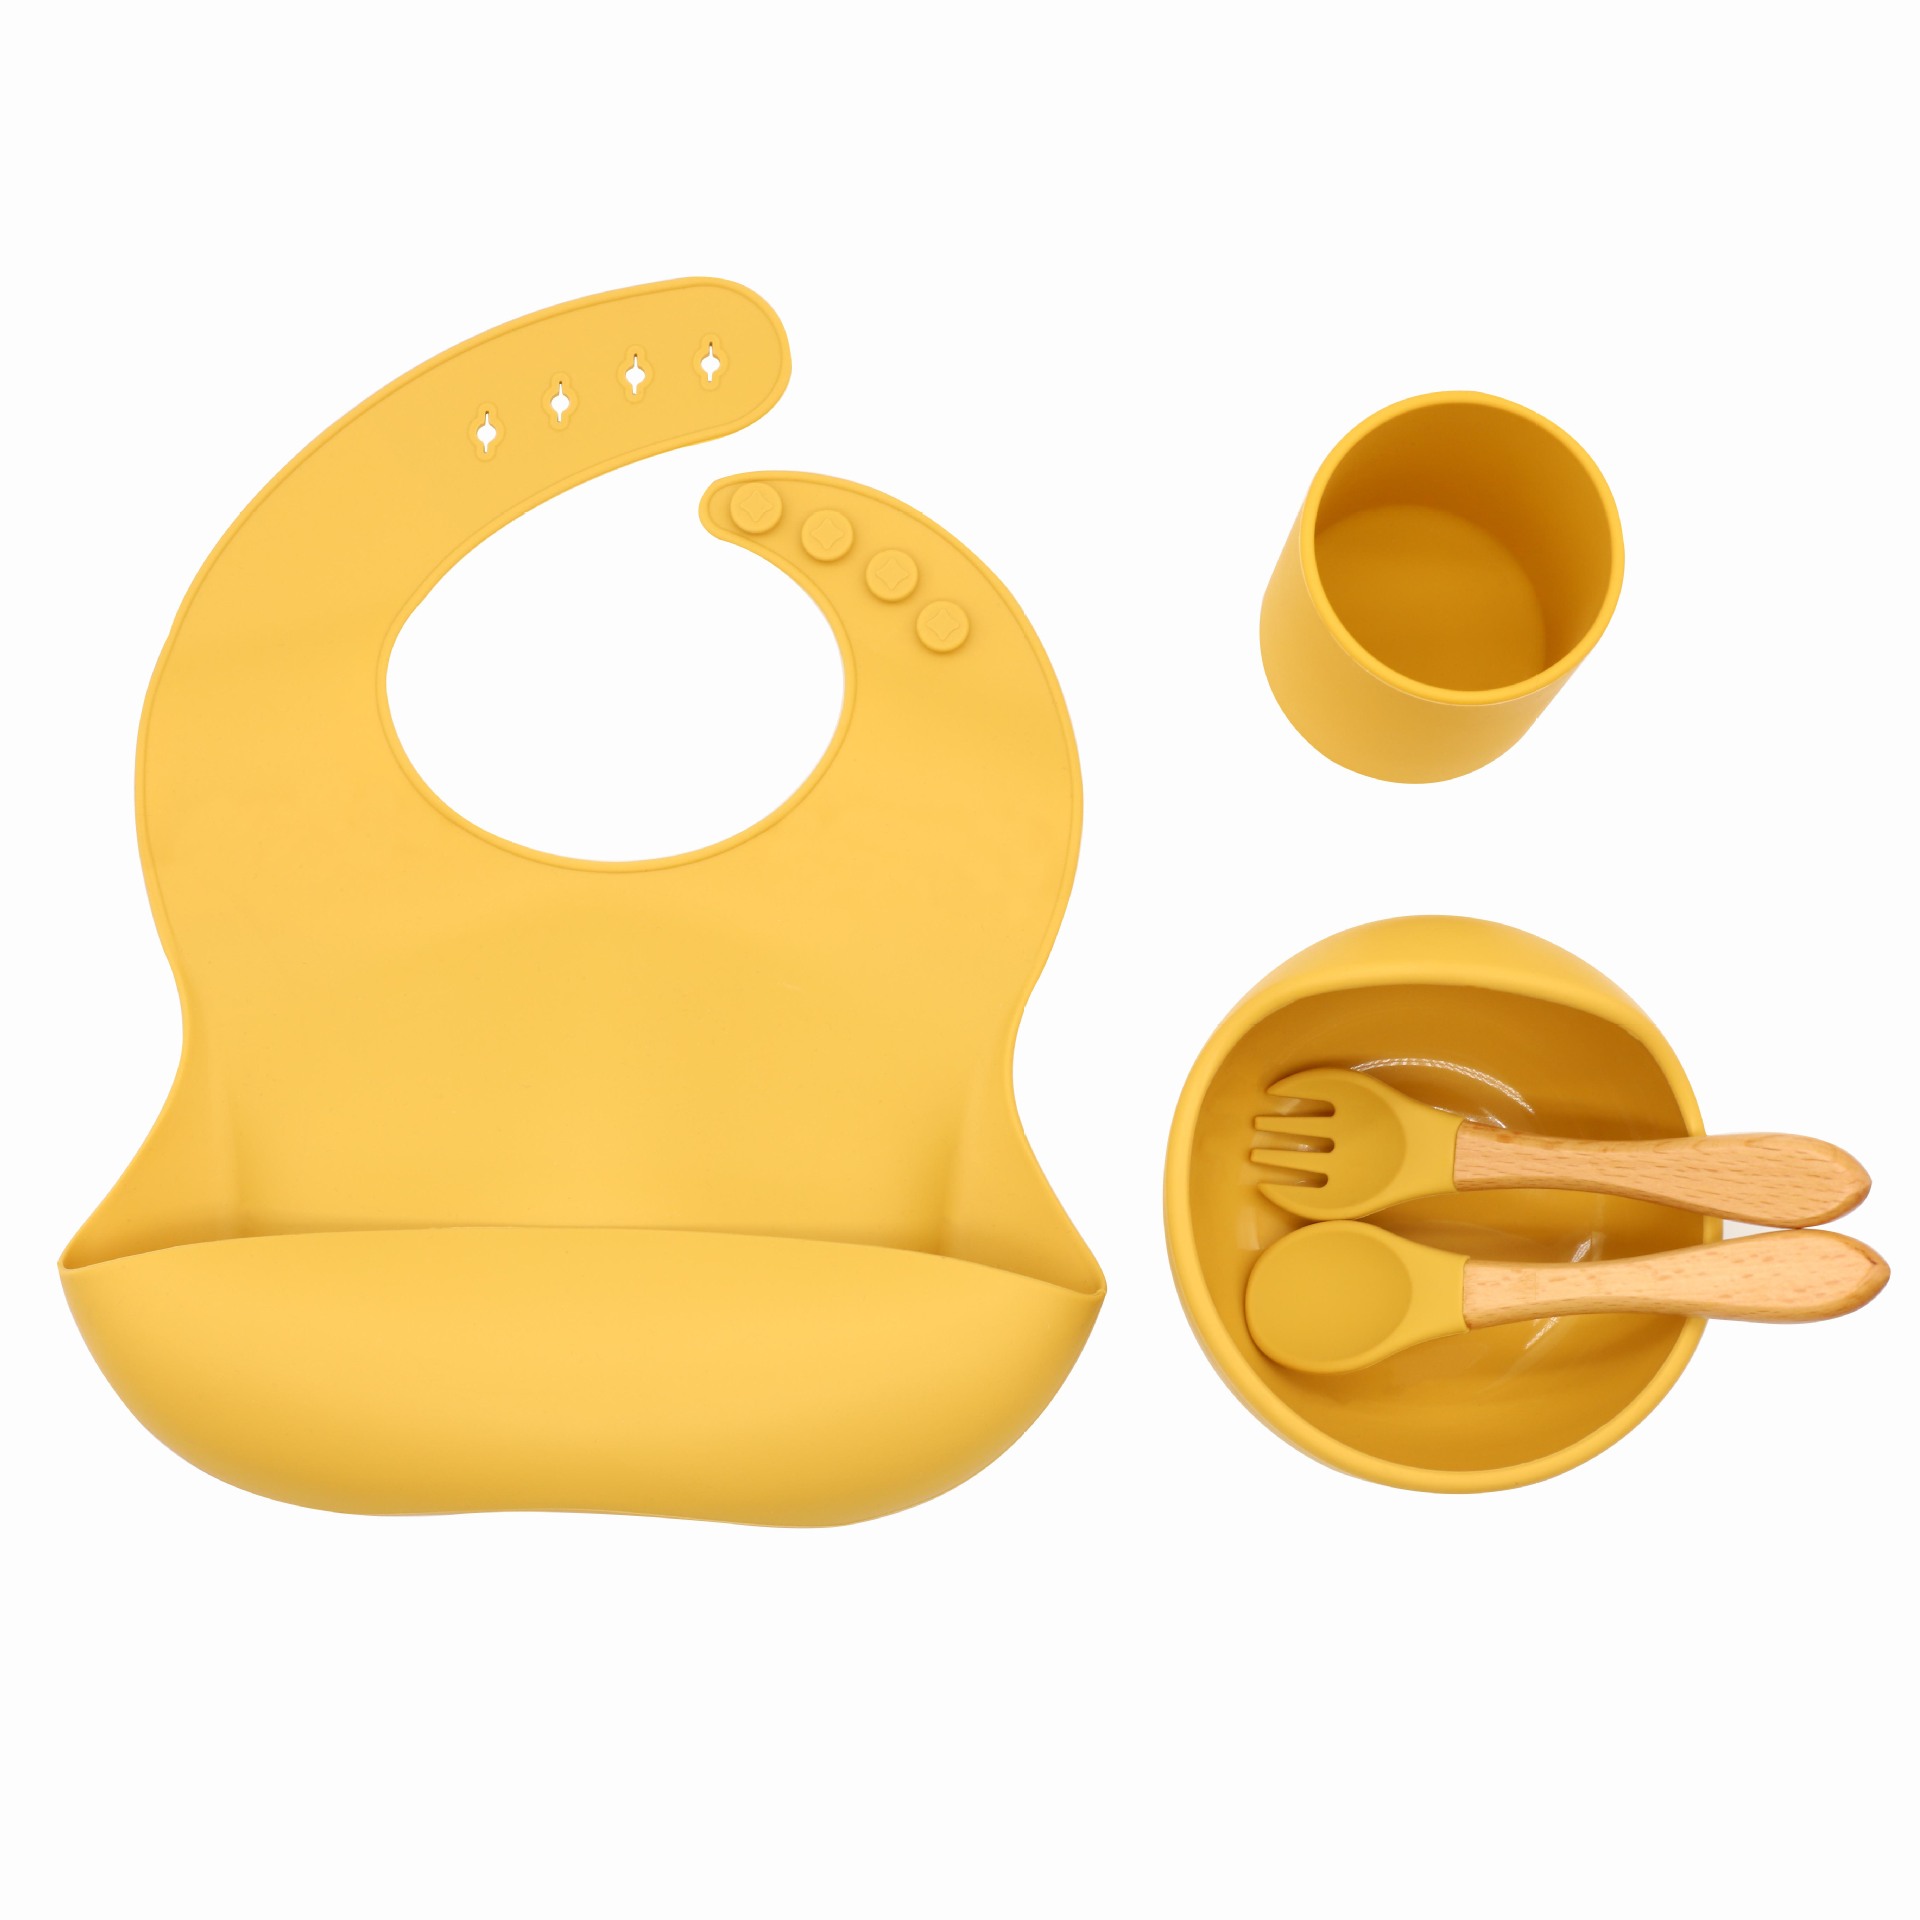 Factory Direct Supply Silicone Dinner Plate Amazon Compartment Suction Cup Bowl Baby Tableware Silicone Tableware Complementary Food Bowl